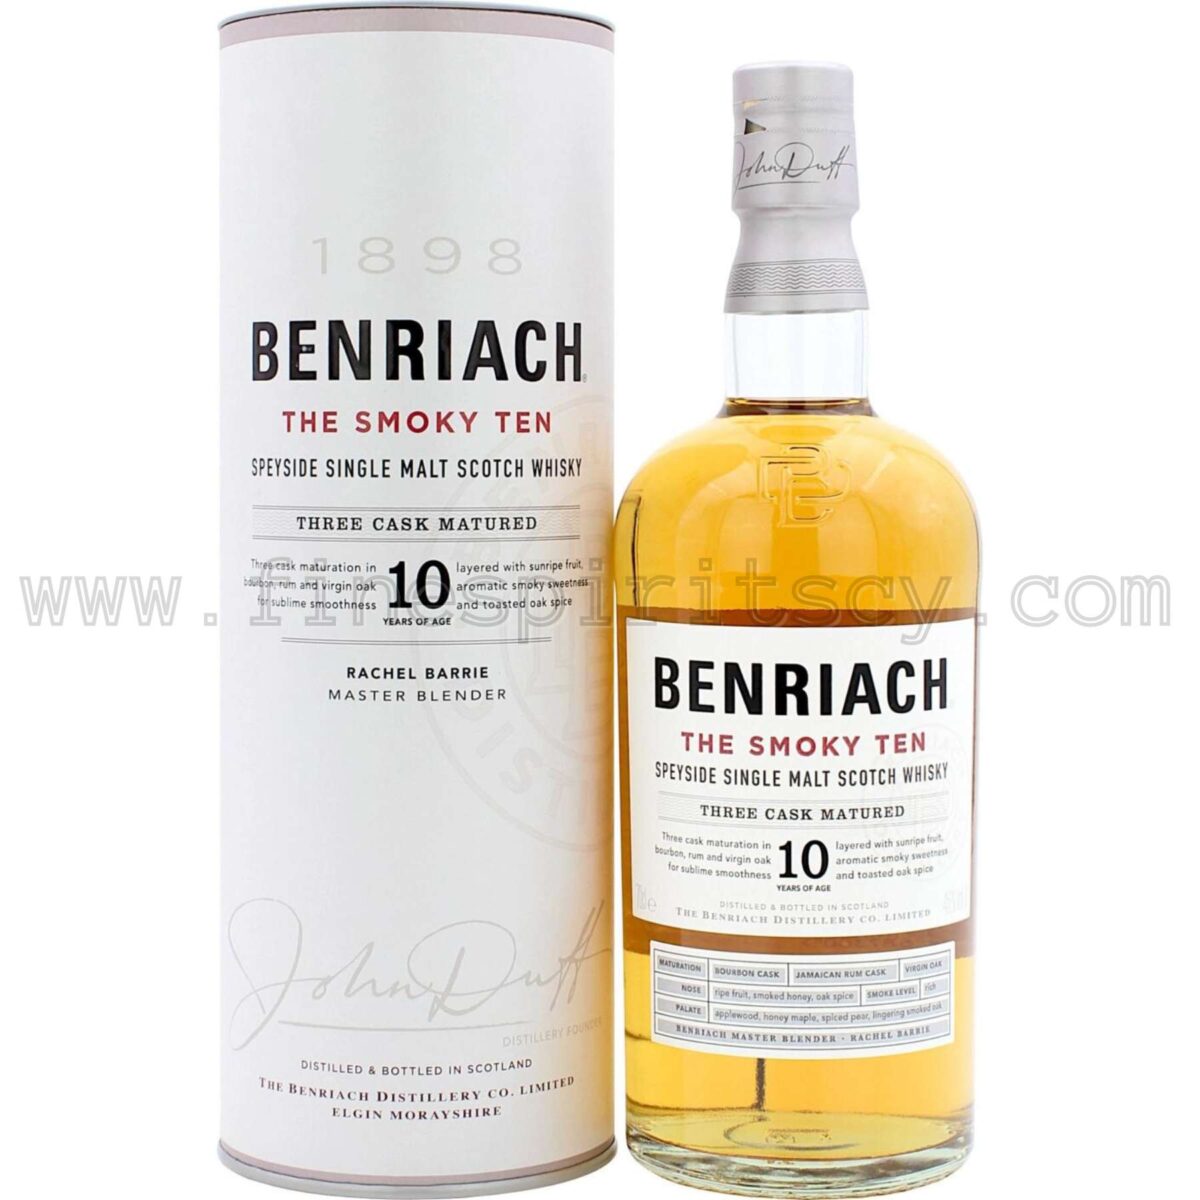 Benriach Smoky Ten Price CY 10 Year Old Cyprus 70cl Shop 700ml 0.7L Whisky